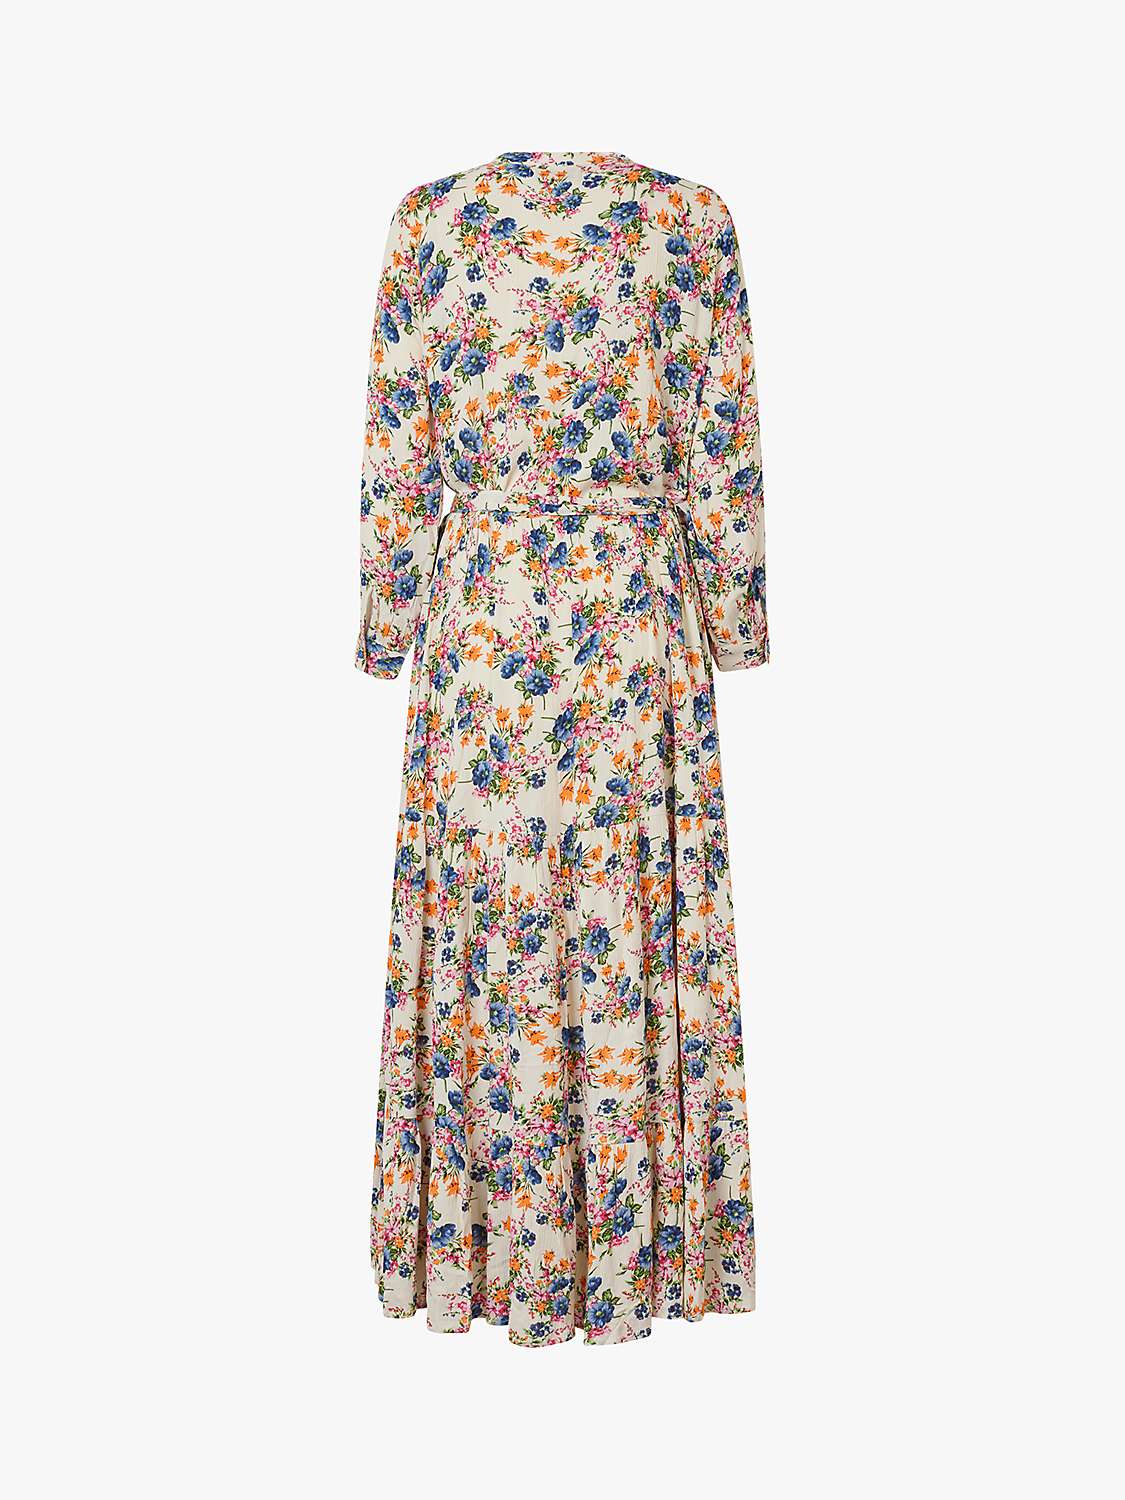 Buy Lollys Laundry Nee Floral Print 3/4 Sleeve Maxi Dress, Multi Online at johnlewis.com